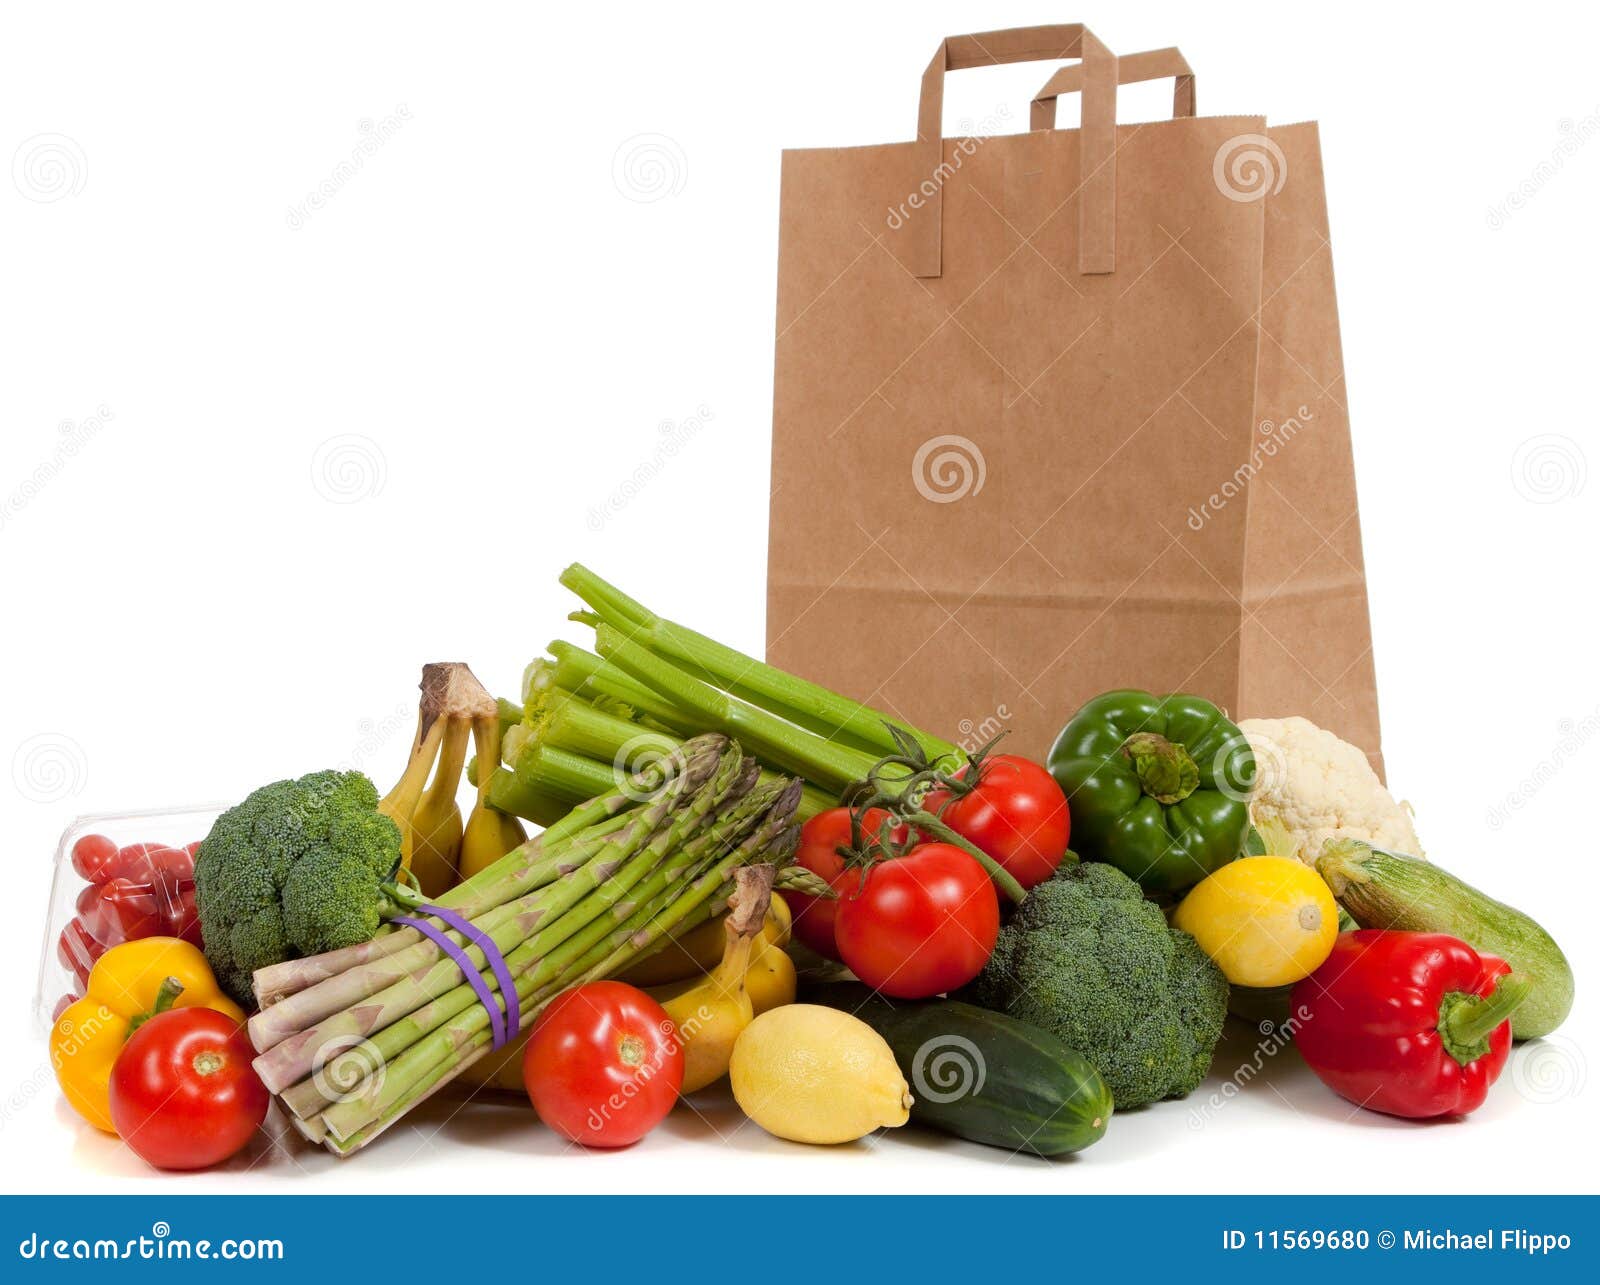 assorted vegetables with a grocery sack